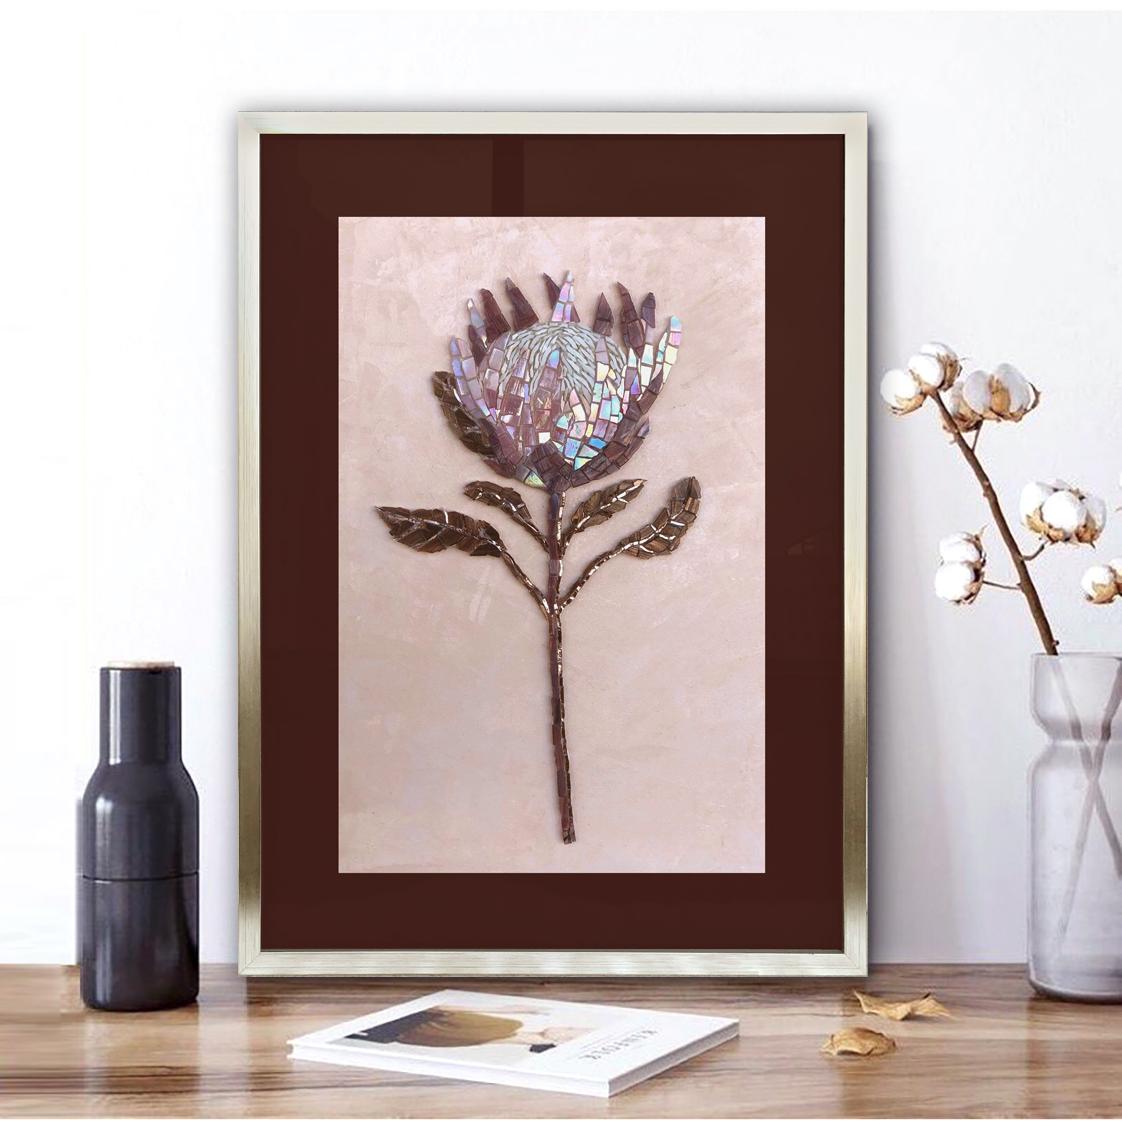 Protea flower in purple glass mosaic with silver inlay.
Deep wooden frame in champagne colour under glass. 
An exotic flower resembling a sweet airy cake wrapped in a bright package with sharp edges.
Vivid but noble home decoration.